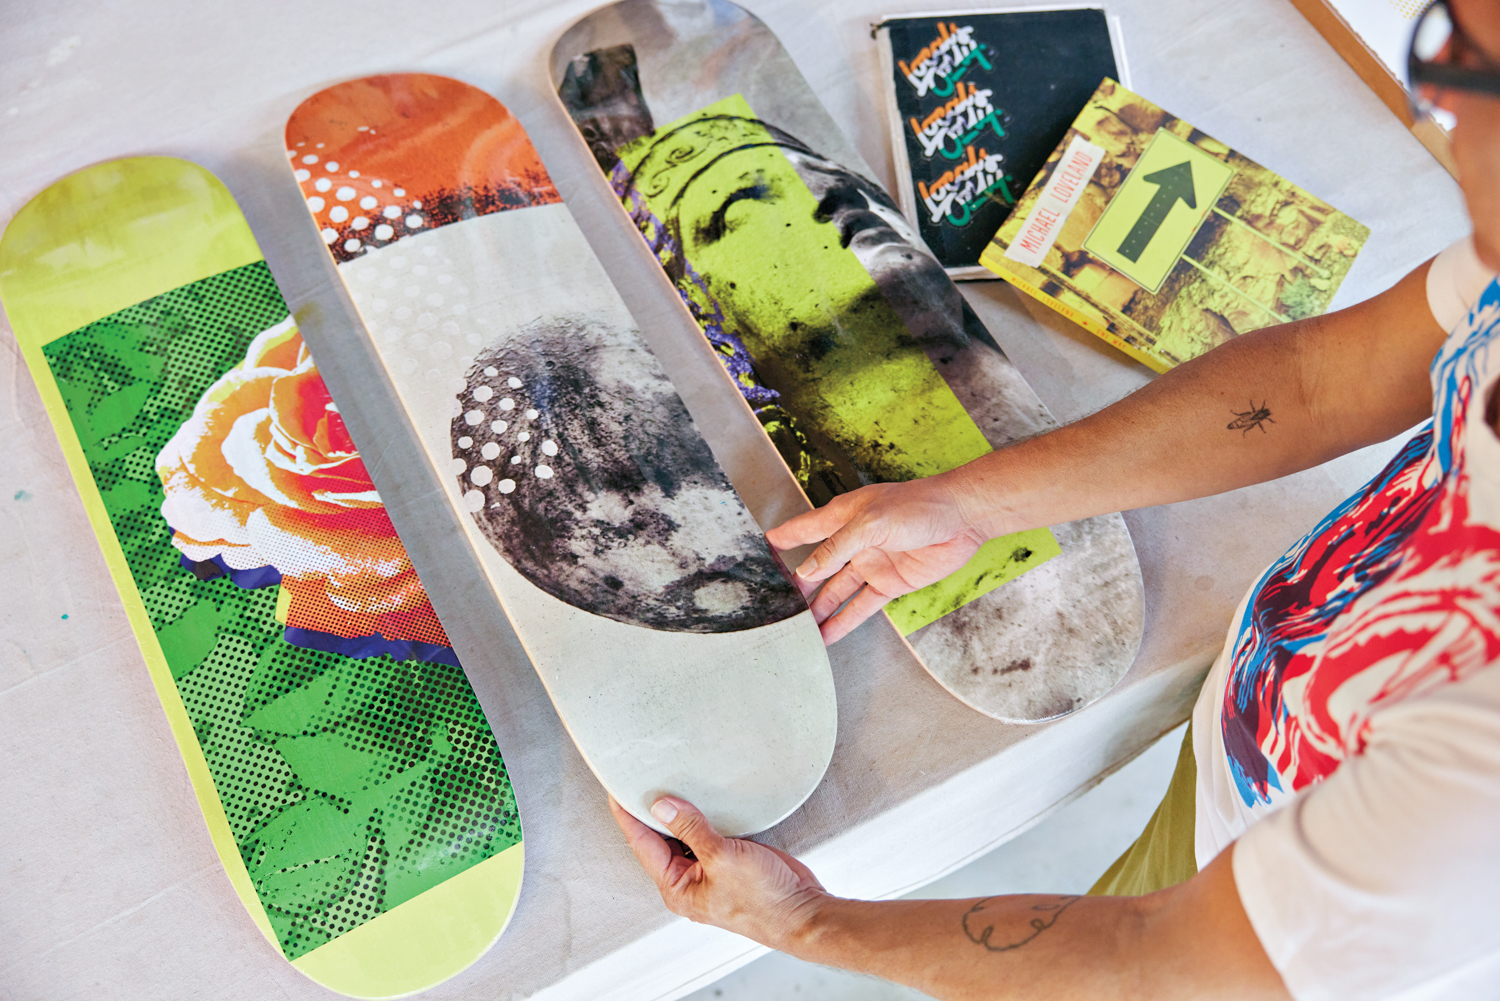 michael loveland holding skateboard forms with collaged elements